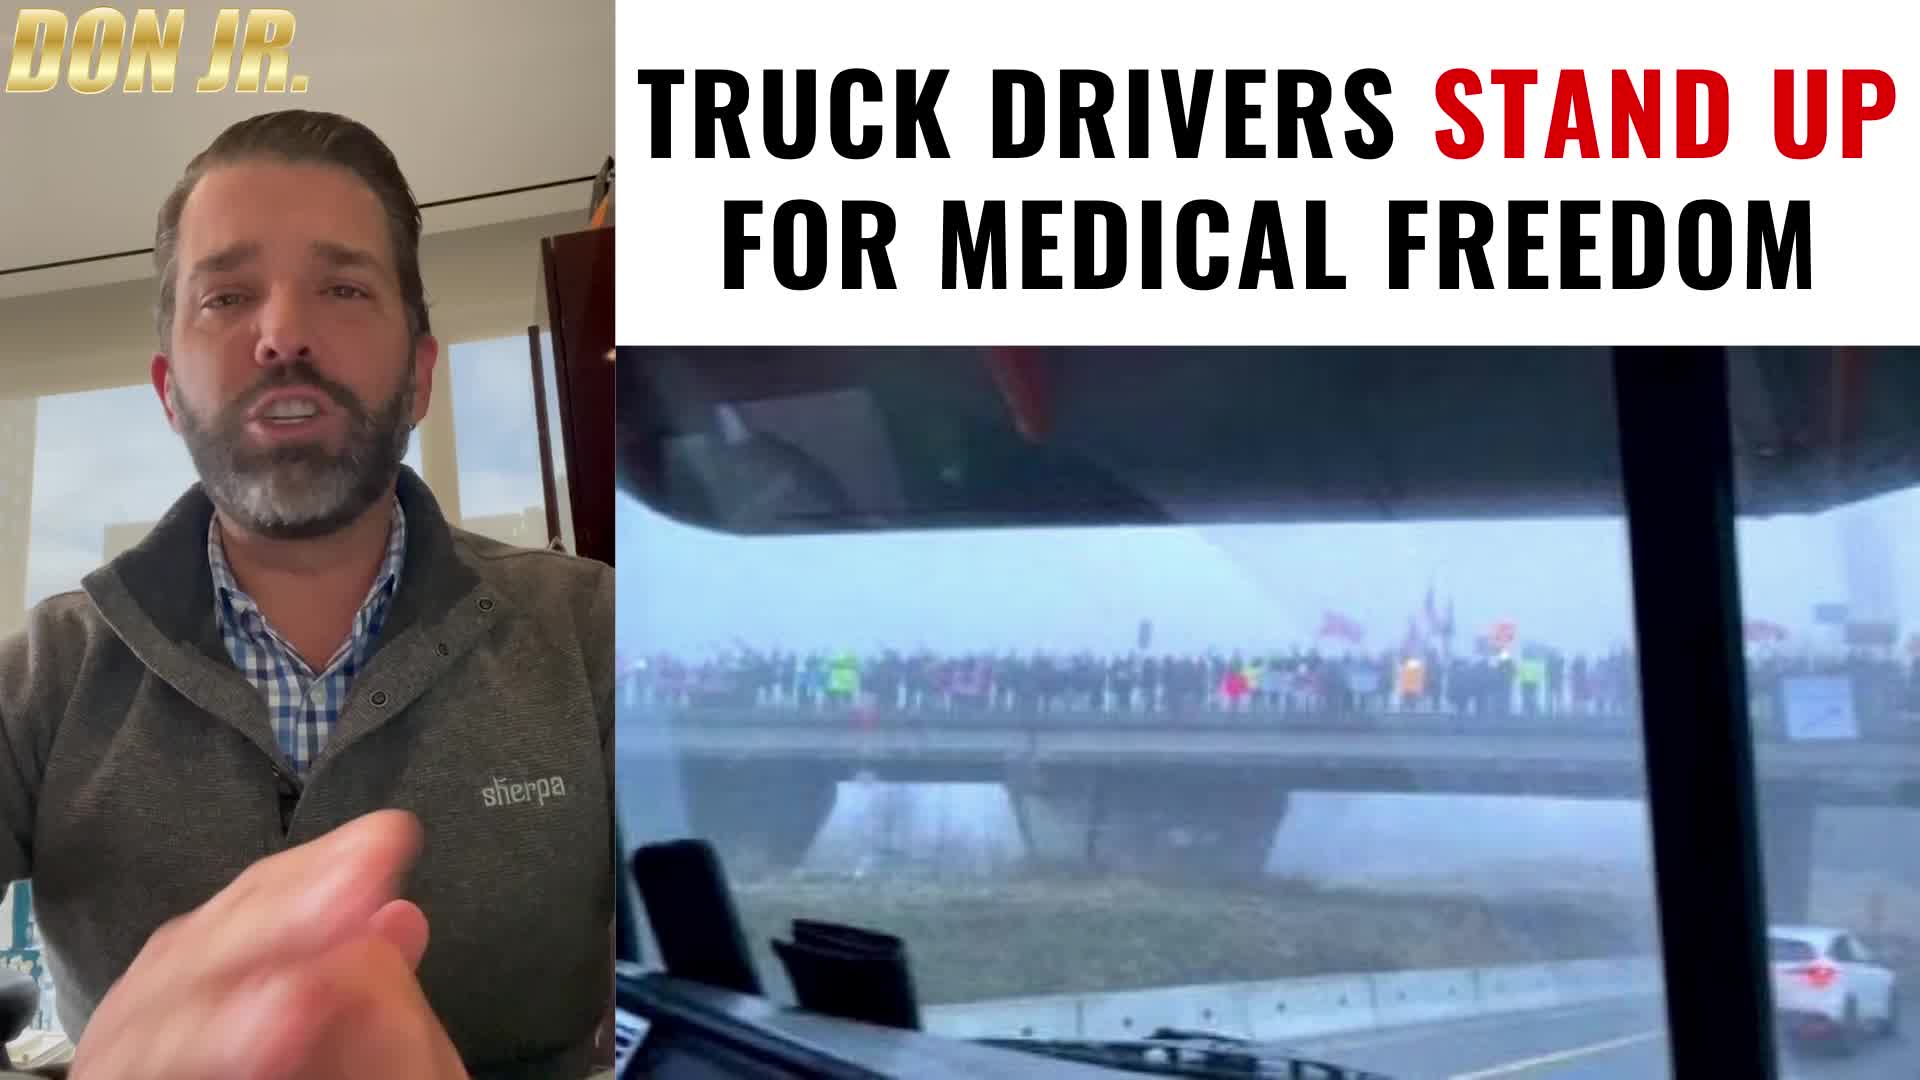 Heroic Truck Driver Stands Up To Medical Tyranny!